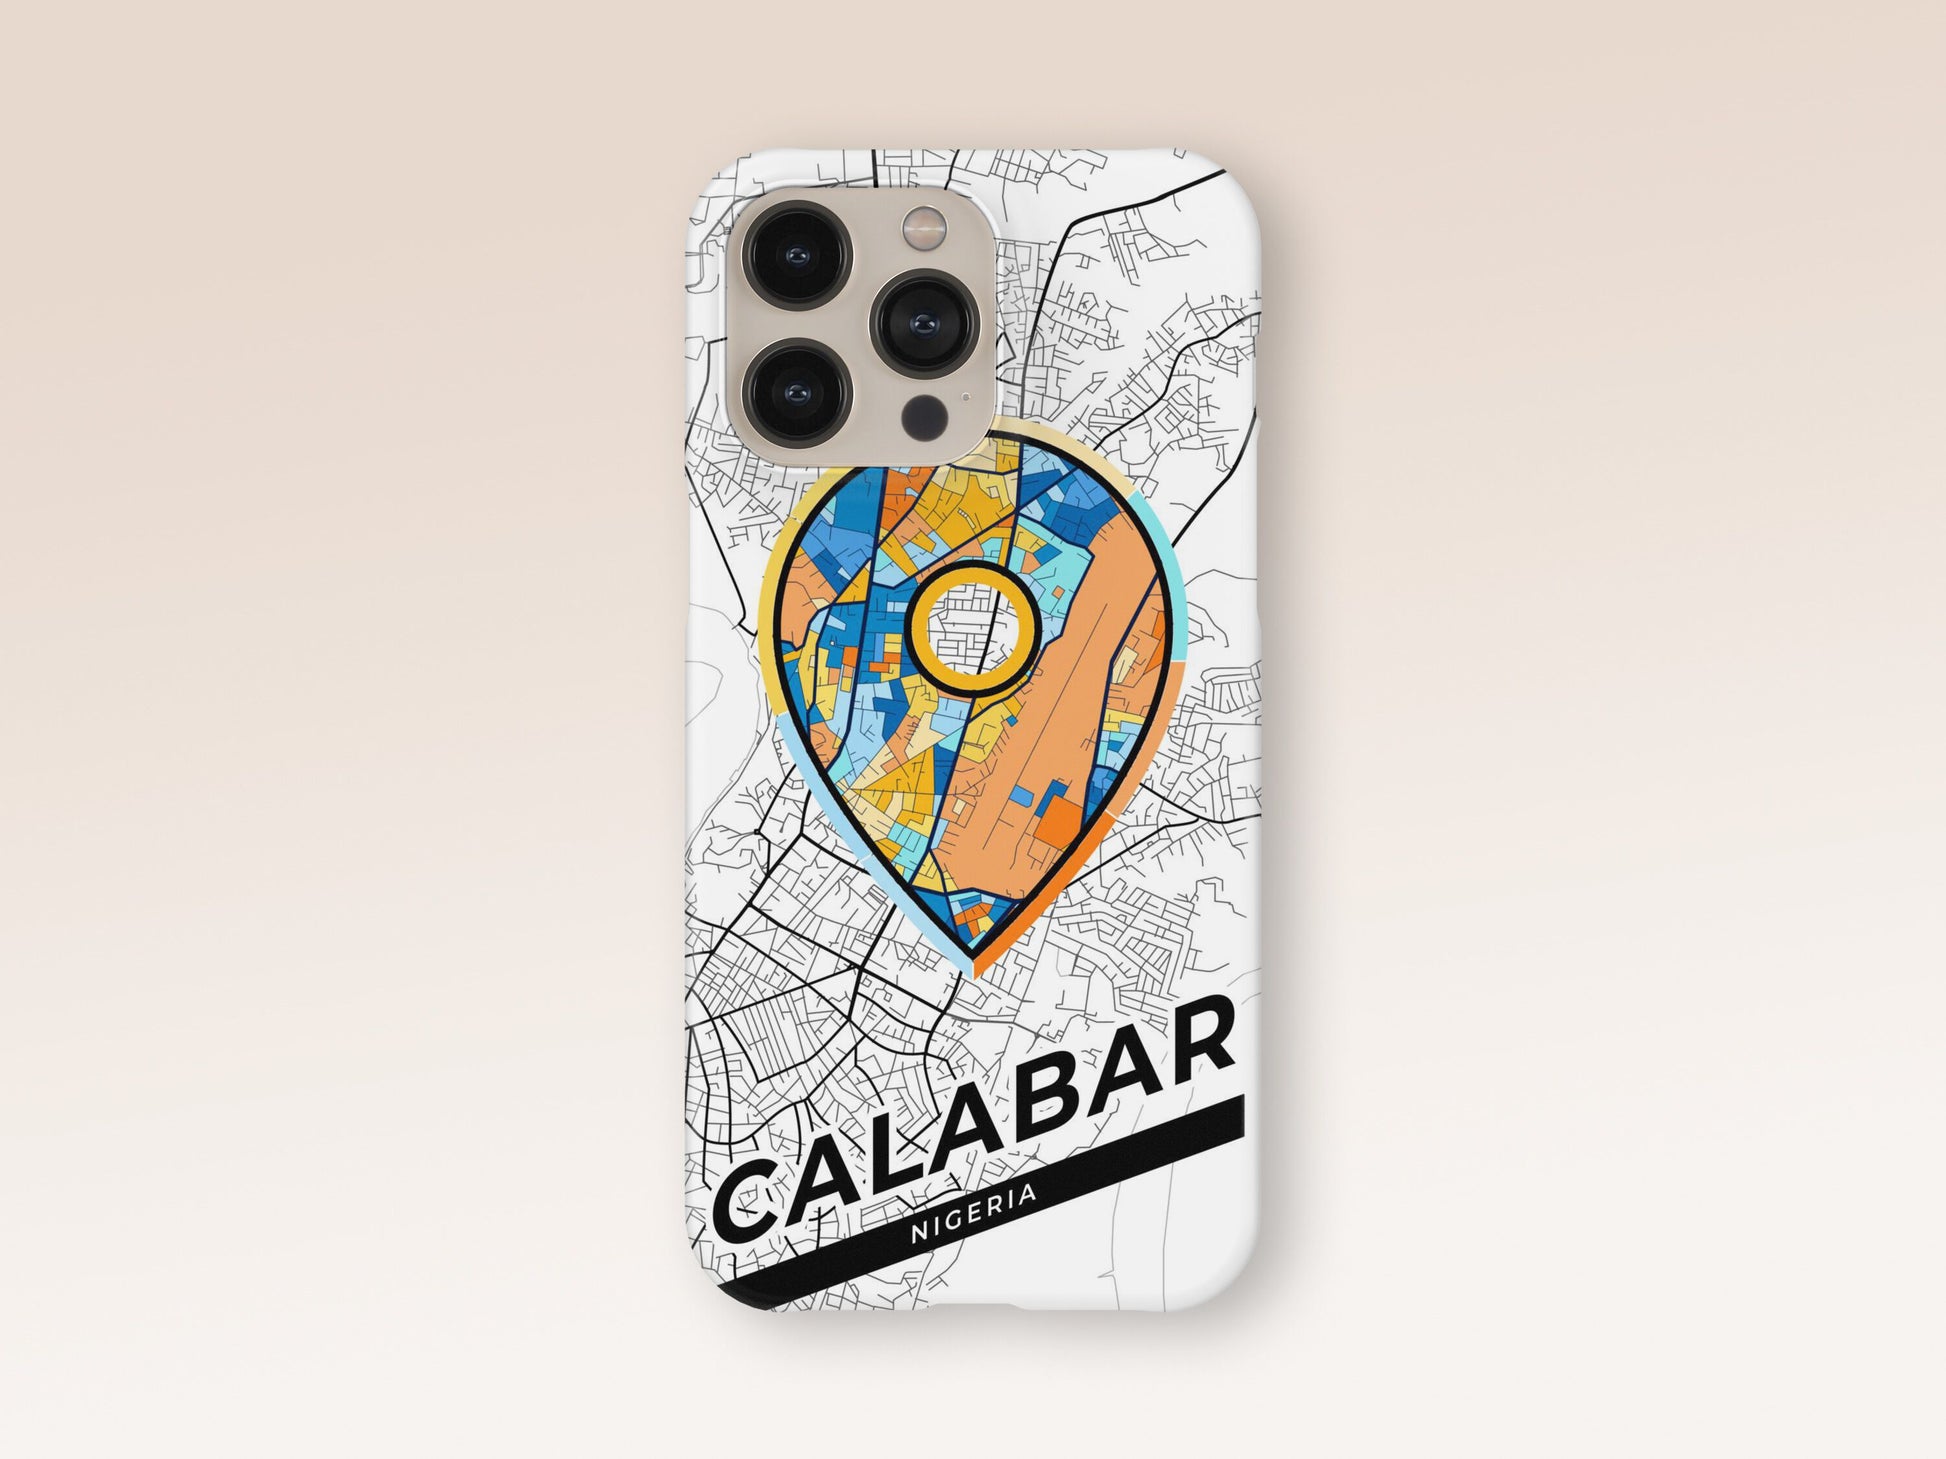 Calabar Nigeria slim phone case with colorful icon. Birthday, wedding or housewarming gift. Couple match cases. 1